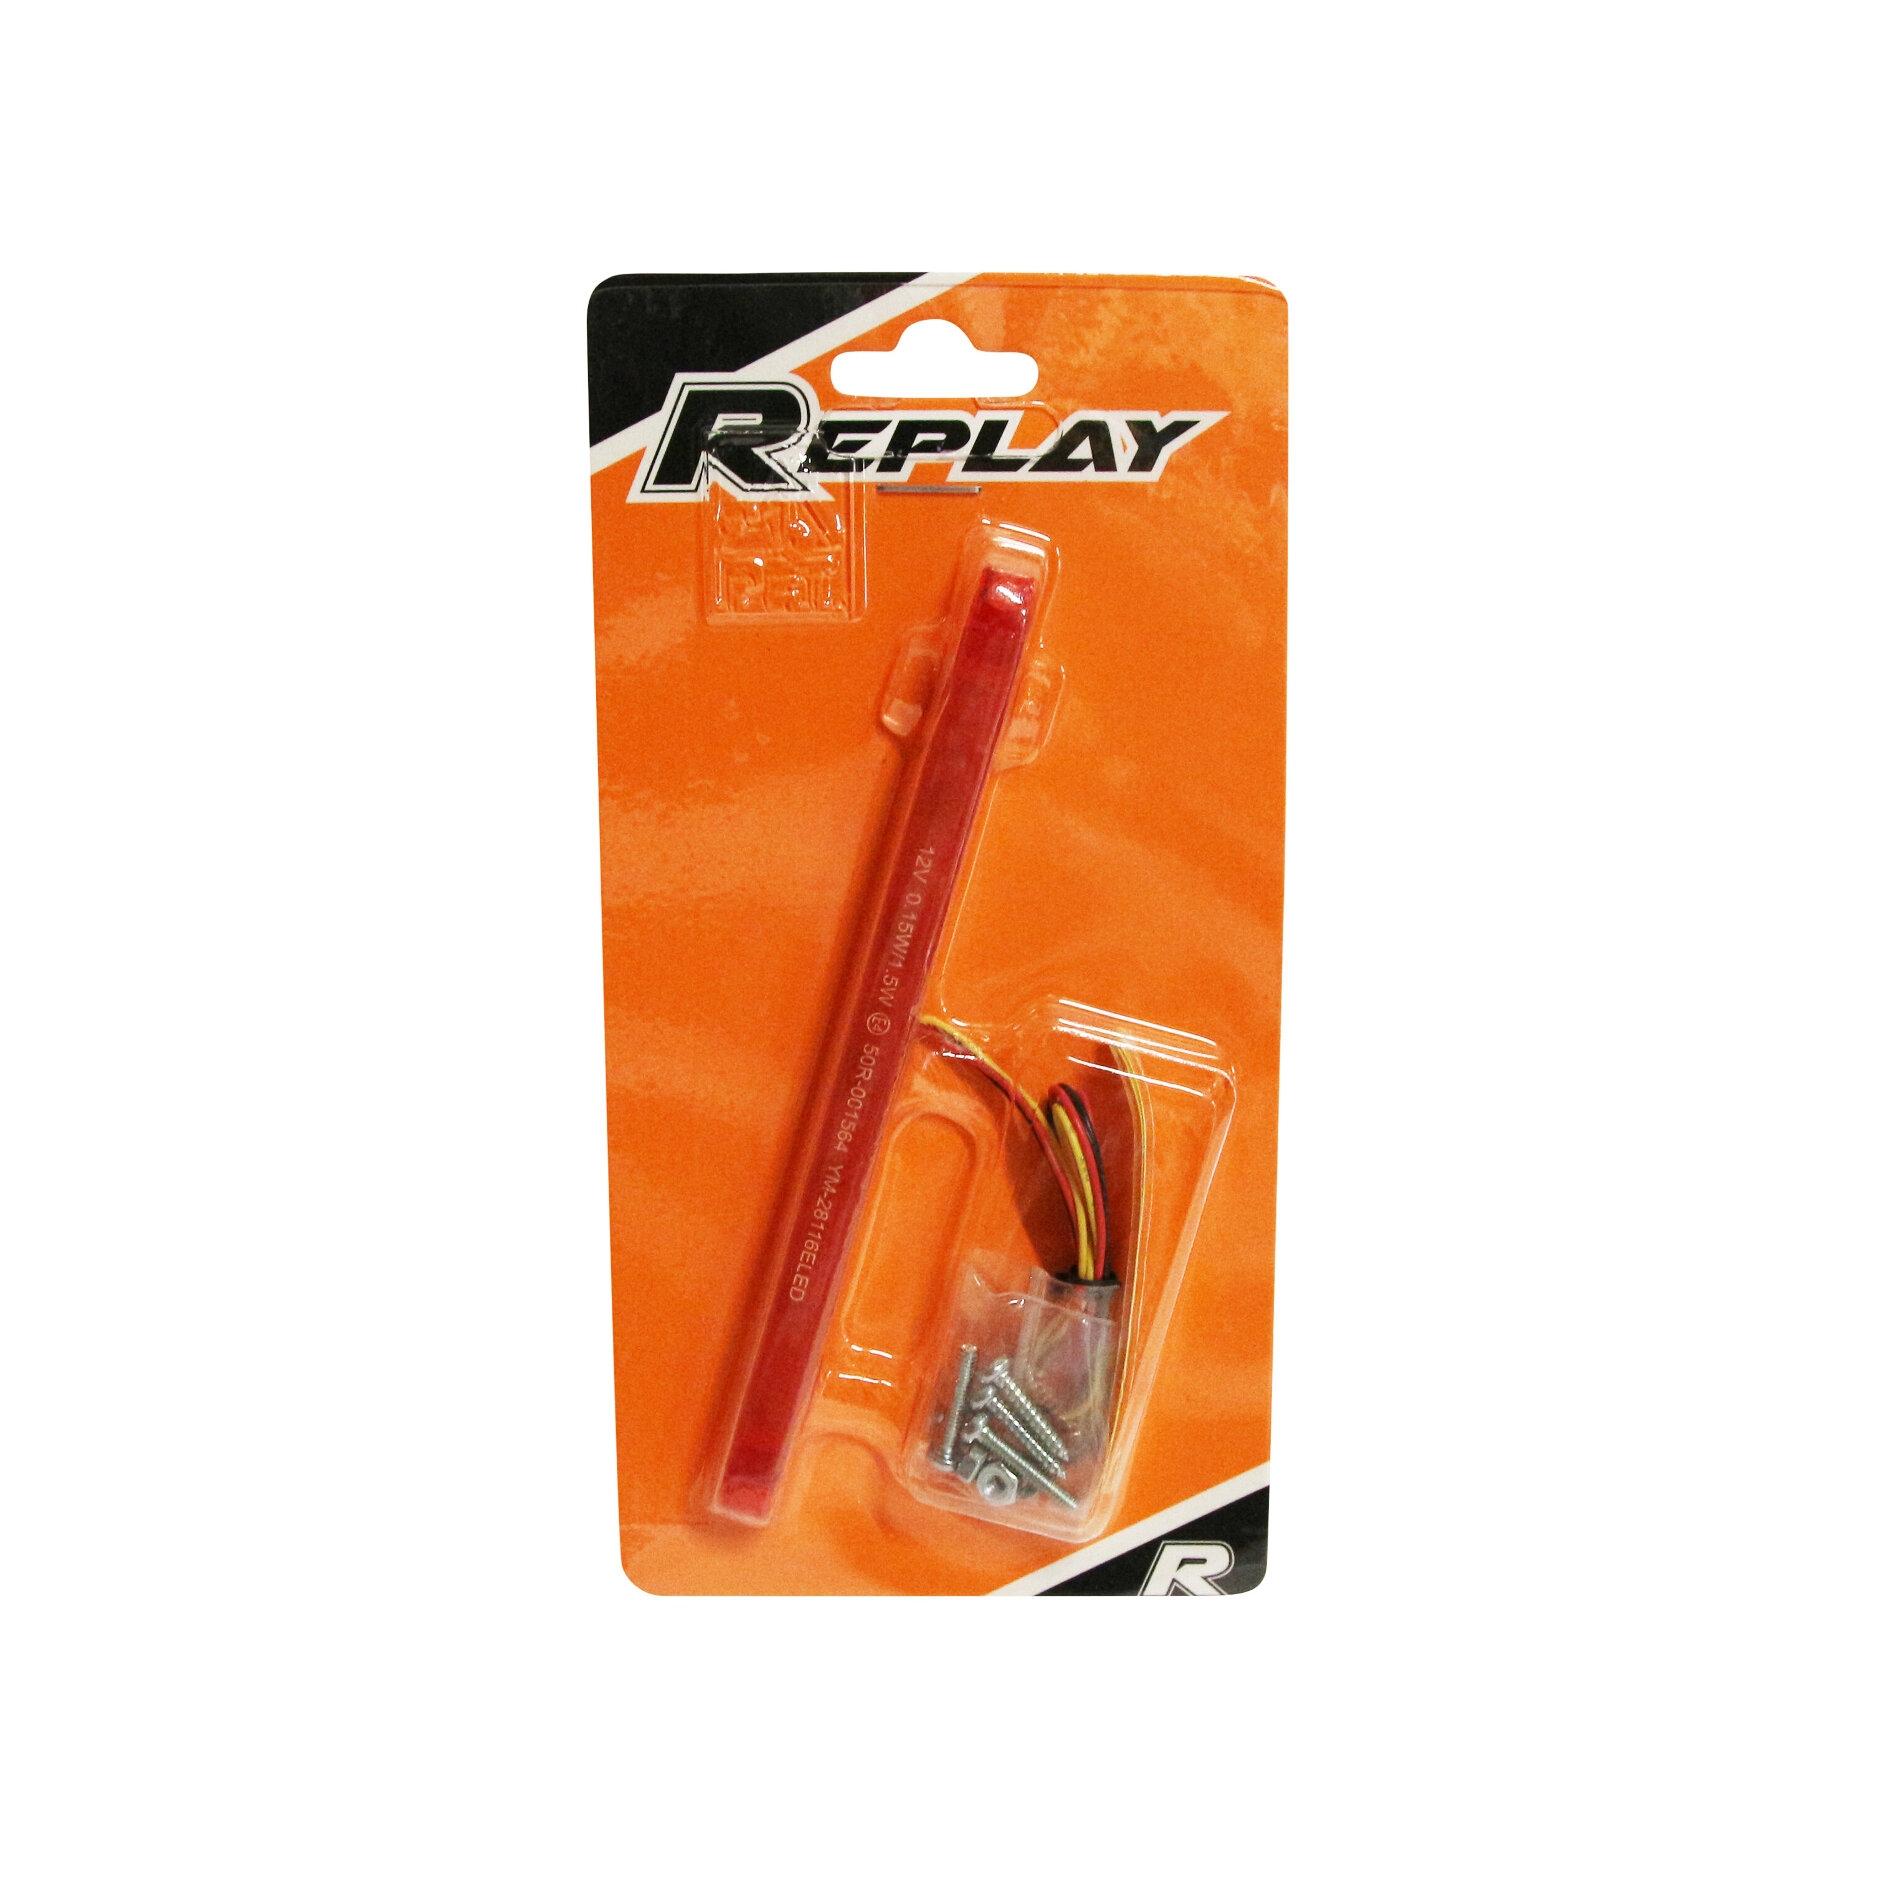 FEU ARRIERE UNIVERSEL REPLAY A LEDS OVALE ROUGE 15 LEDS ** - FP MOTO